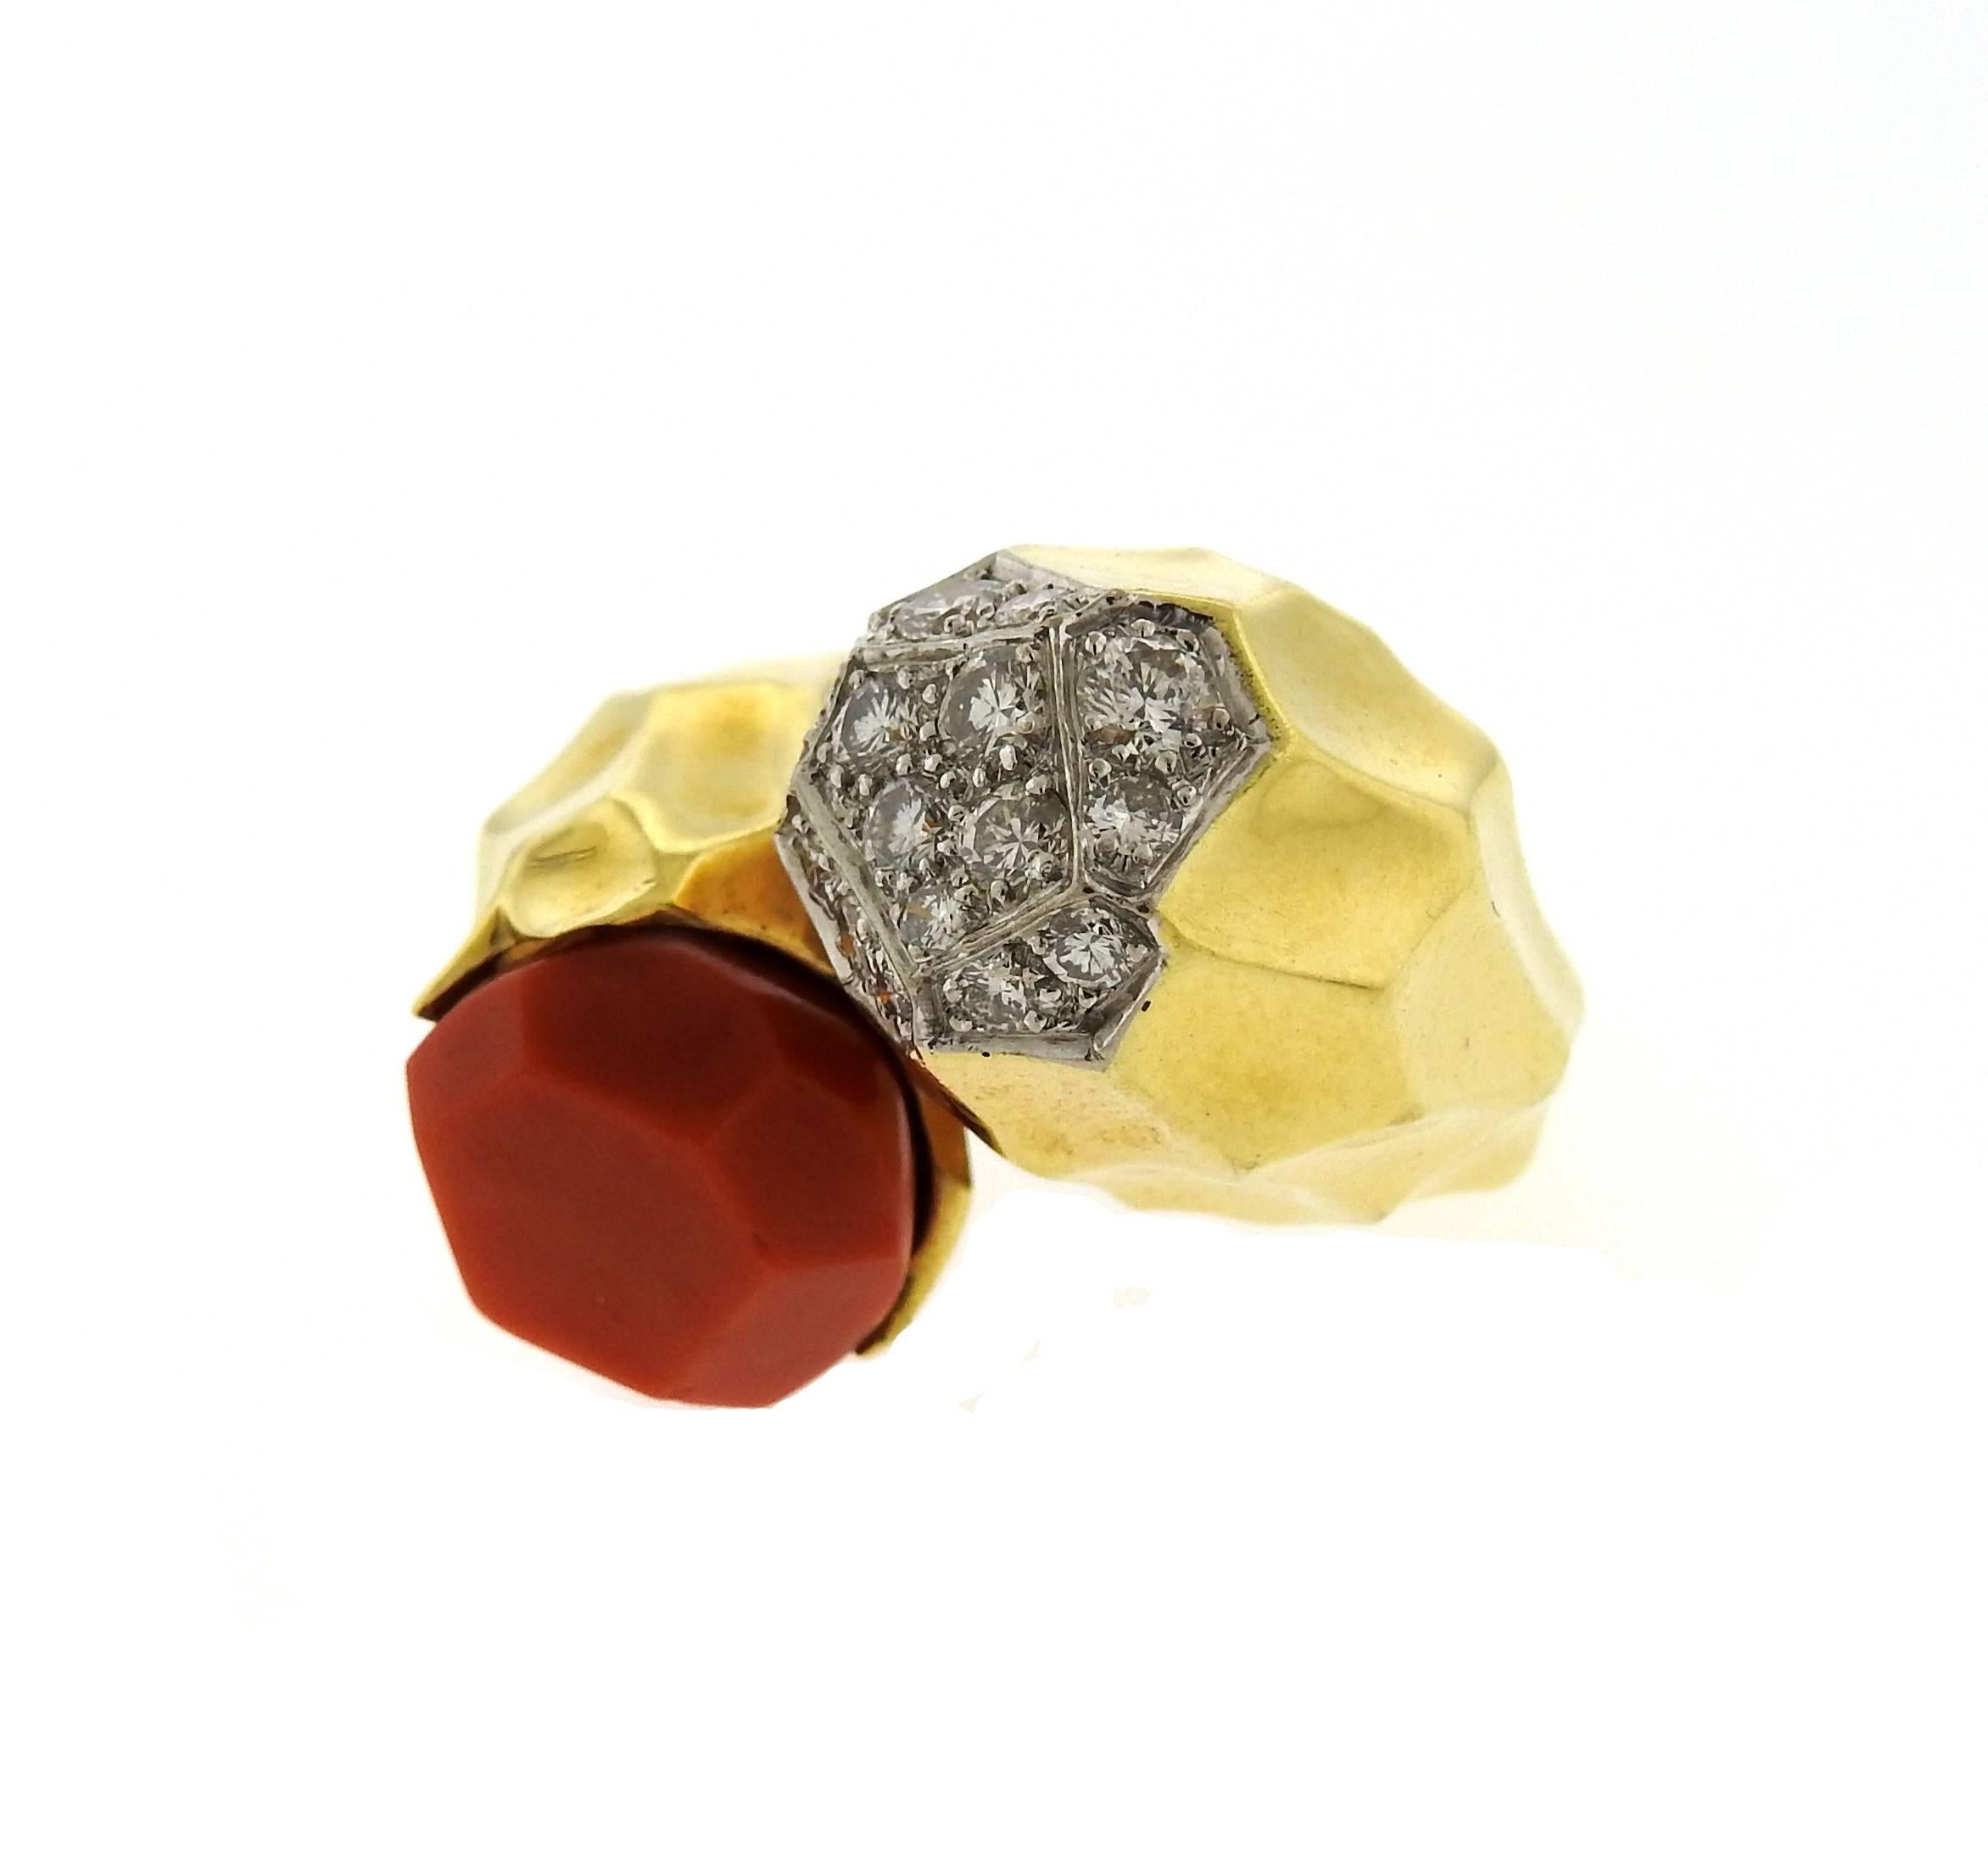 An 18k yellow gold ring set with coral and approximately 0.90ctw of G/VS diamonds.  The ring is a size 5.75, ends measure 15.5mm and 13.3mm in diameter. Ring is 24mm at widest point.  Marked: Kutchinsky, English Assay marks. The weight of the ring